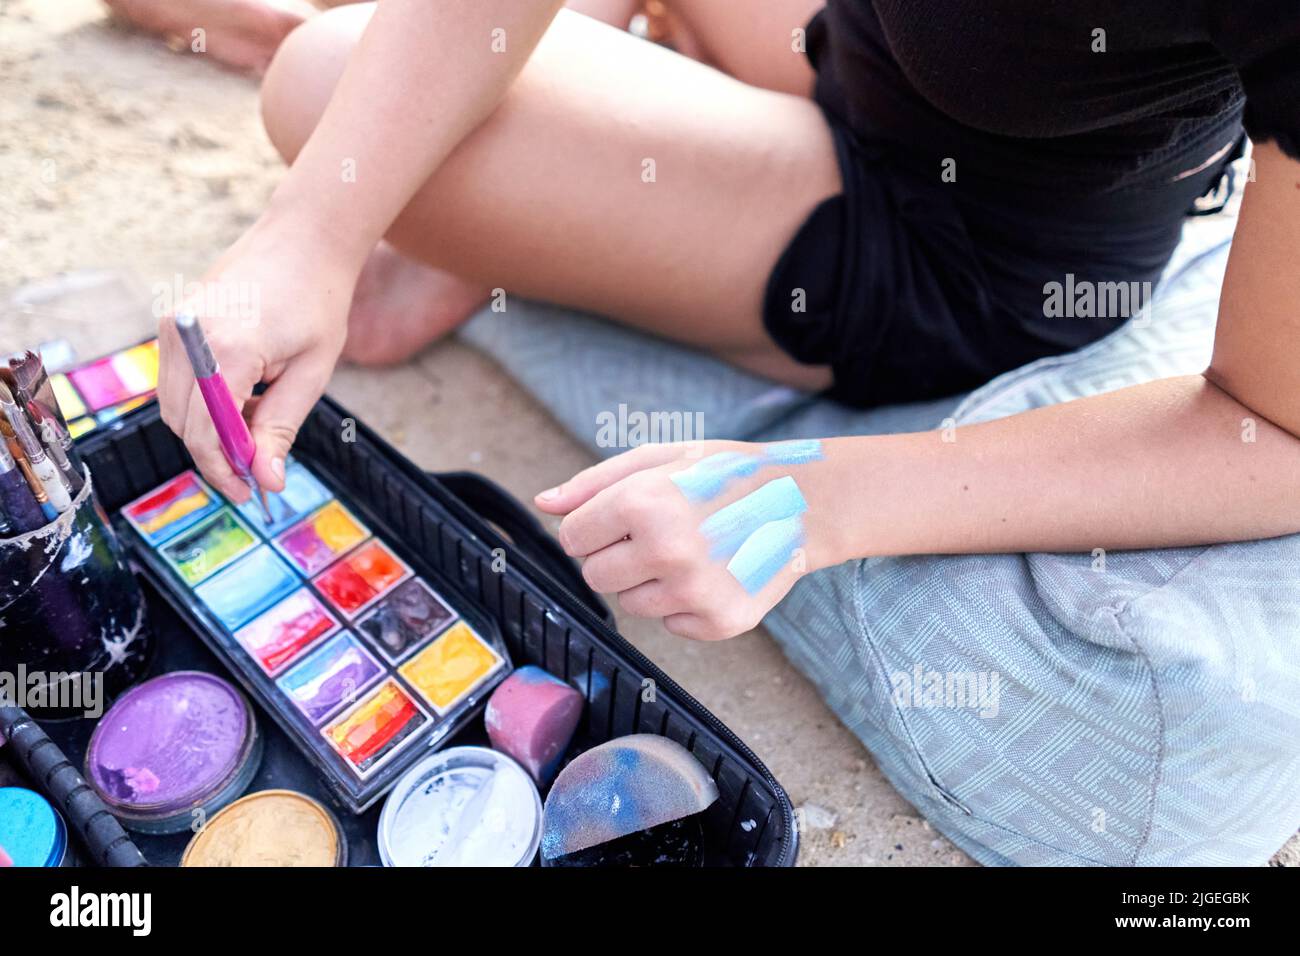 Artist trying out shades of color on her skin during a body paint session. Stock Photo